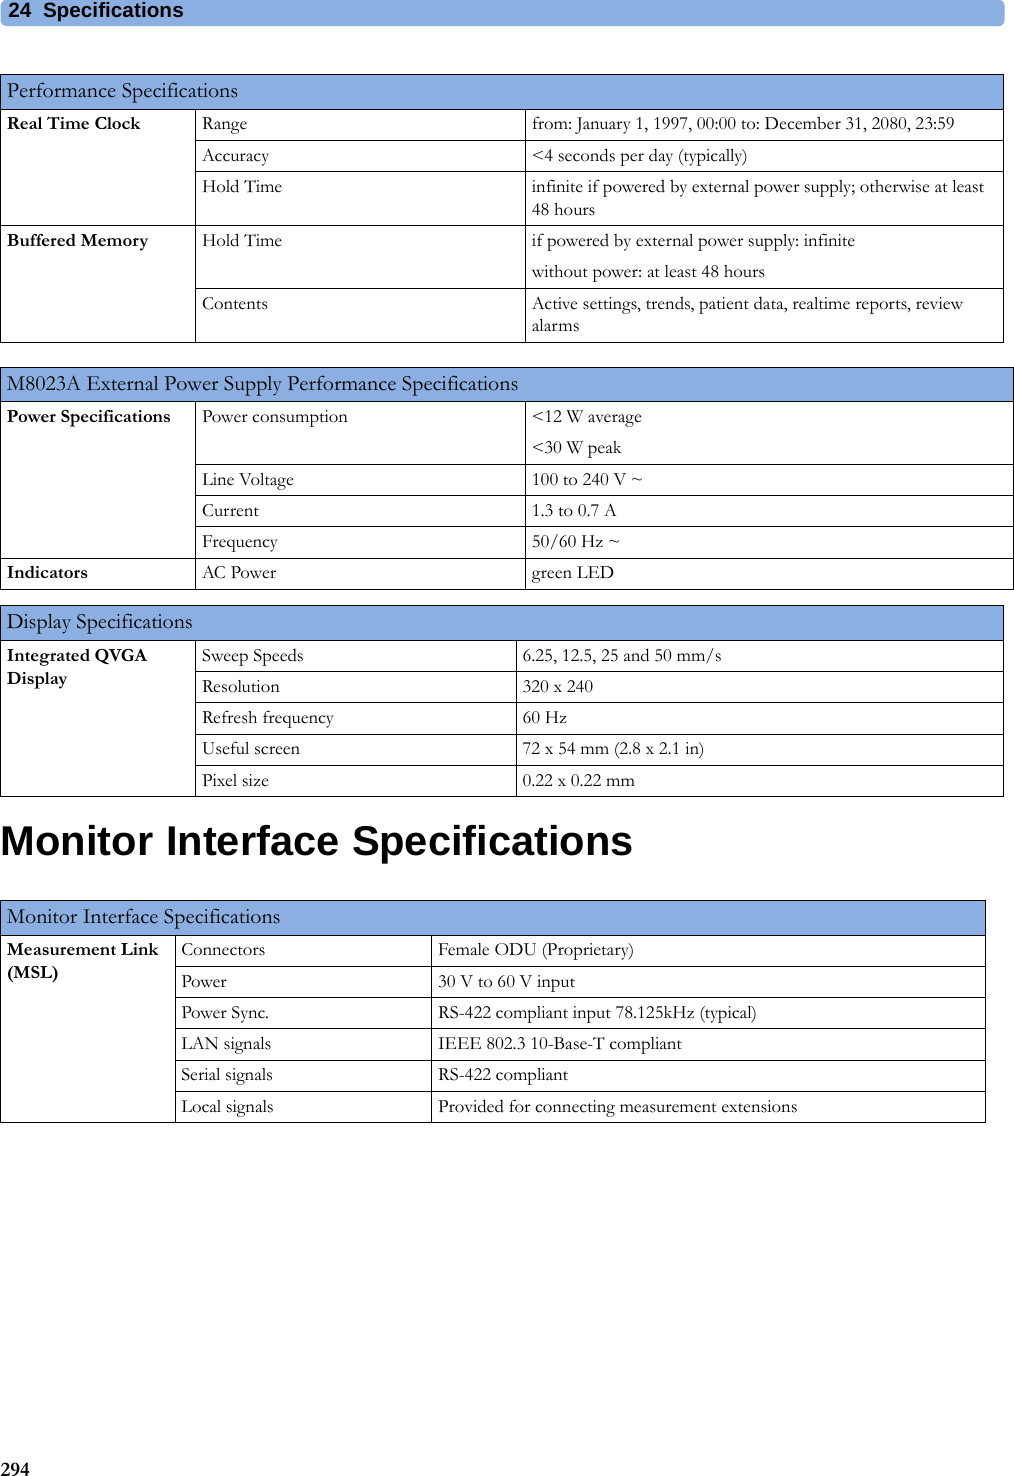 24 Specifications294Monitor Interface SpecificationsReal Time Clock Range from: January 1, 1997, 00:00 to: December 31, 2080, 23:59Accuracy &lt;4 seconds per day (typically)Hold Time infinite if powered by external power supply; otherwise at least 48 hoursBuffered Memory Hold Time if powered by external power supply: infinitewithout power: at least 48 hoursContents Active settings, trends, patient data, realtime reports, review alarmsPerformance SpecificationsM8023A External Power Supply Performance SpecificationsPower Specifications Power consumption &lt;12 W average&lt;30 W peakLine Voltage 100 to 240 V ~Current 1.3 to 0.7 AFrequency 50/60 Hz ~Indicators AC Power green LEDDisplay SpecificationsIntegrated QVGA DisplaySweep Speeds 6.25, 12.5, 25 and 50 mm/sResolution 320 x 240Refresh frequency 60 HzUseful screen 72x54mm (2.8x2.1in)Pixel size 0.22 x 0.22 mmMonitor Interface SpecificationsMeasurement Link (MSL)Connectors Female ODU (Proprietary)Power 30 V to 60 V inputPower Sync. RS-422 compliant input 78.125kHz (typical)LAN signals IEEE 802.3 10-Base-T compliantSerial signals RS-422 compliantLocal signals Provided for connecting measurement extensions